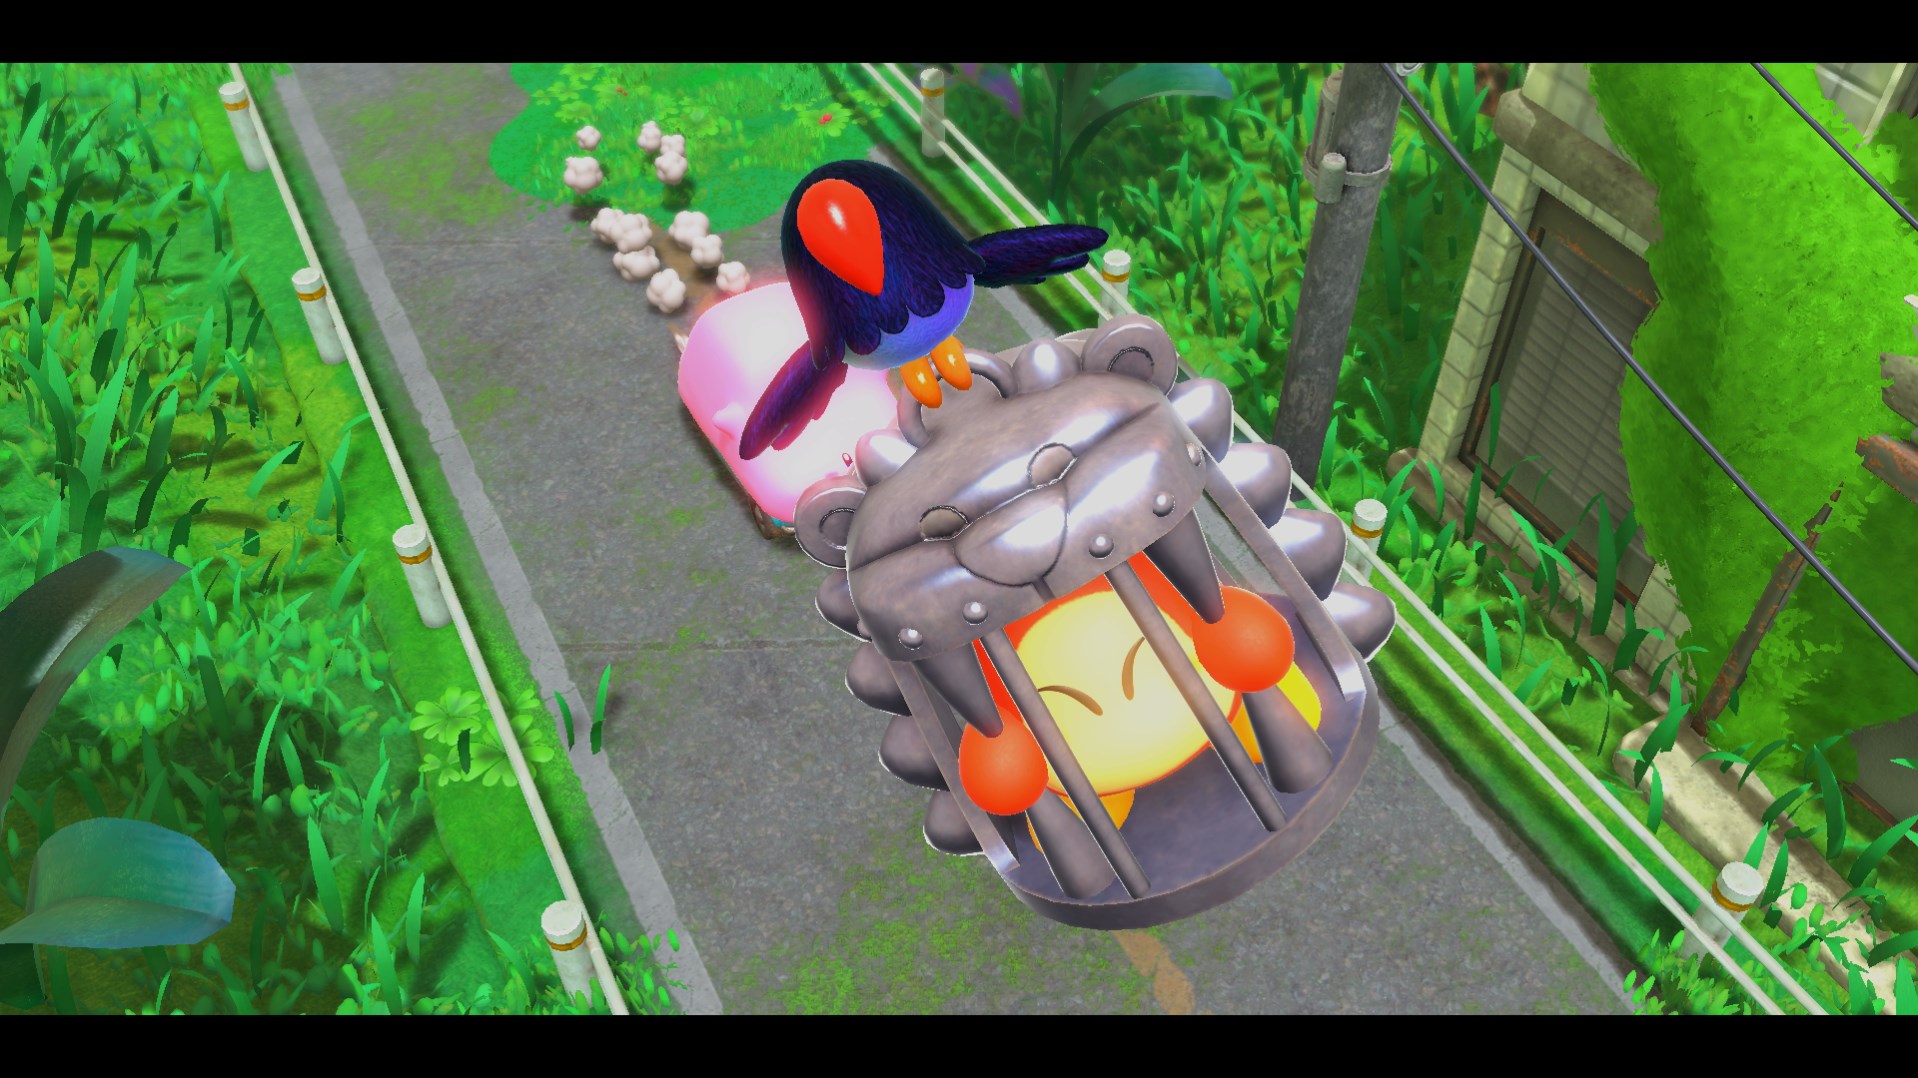 A Waddle Dee in a cage being carried by a crow while Kirby car drives below